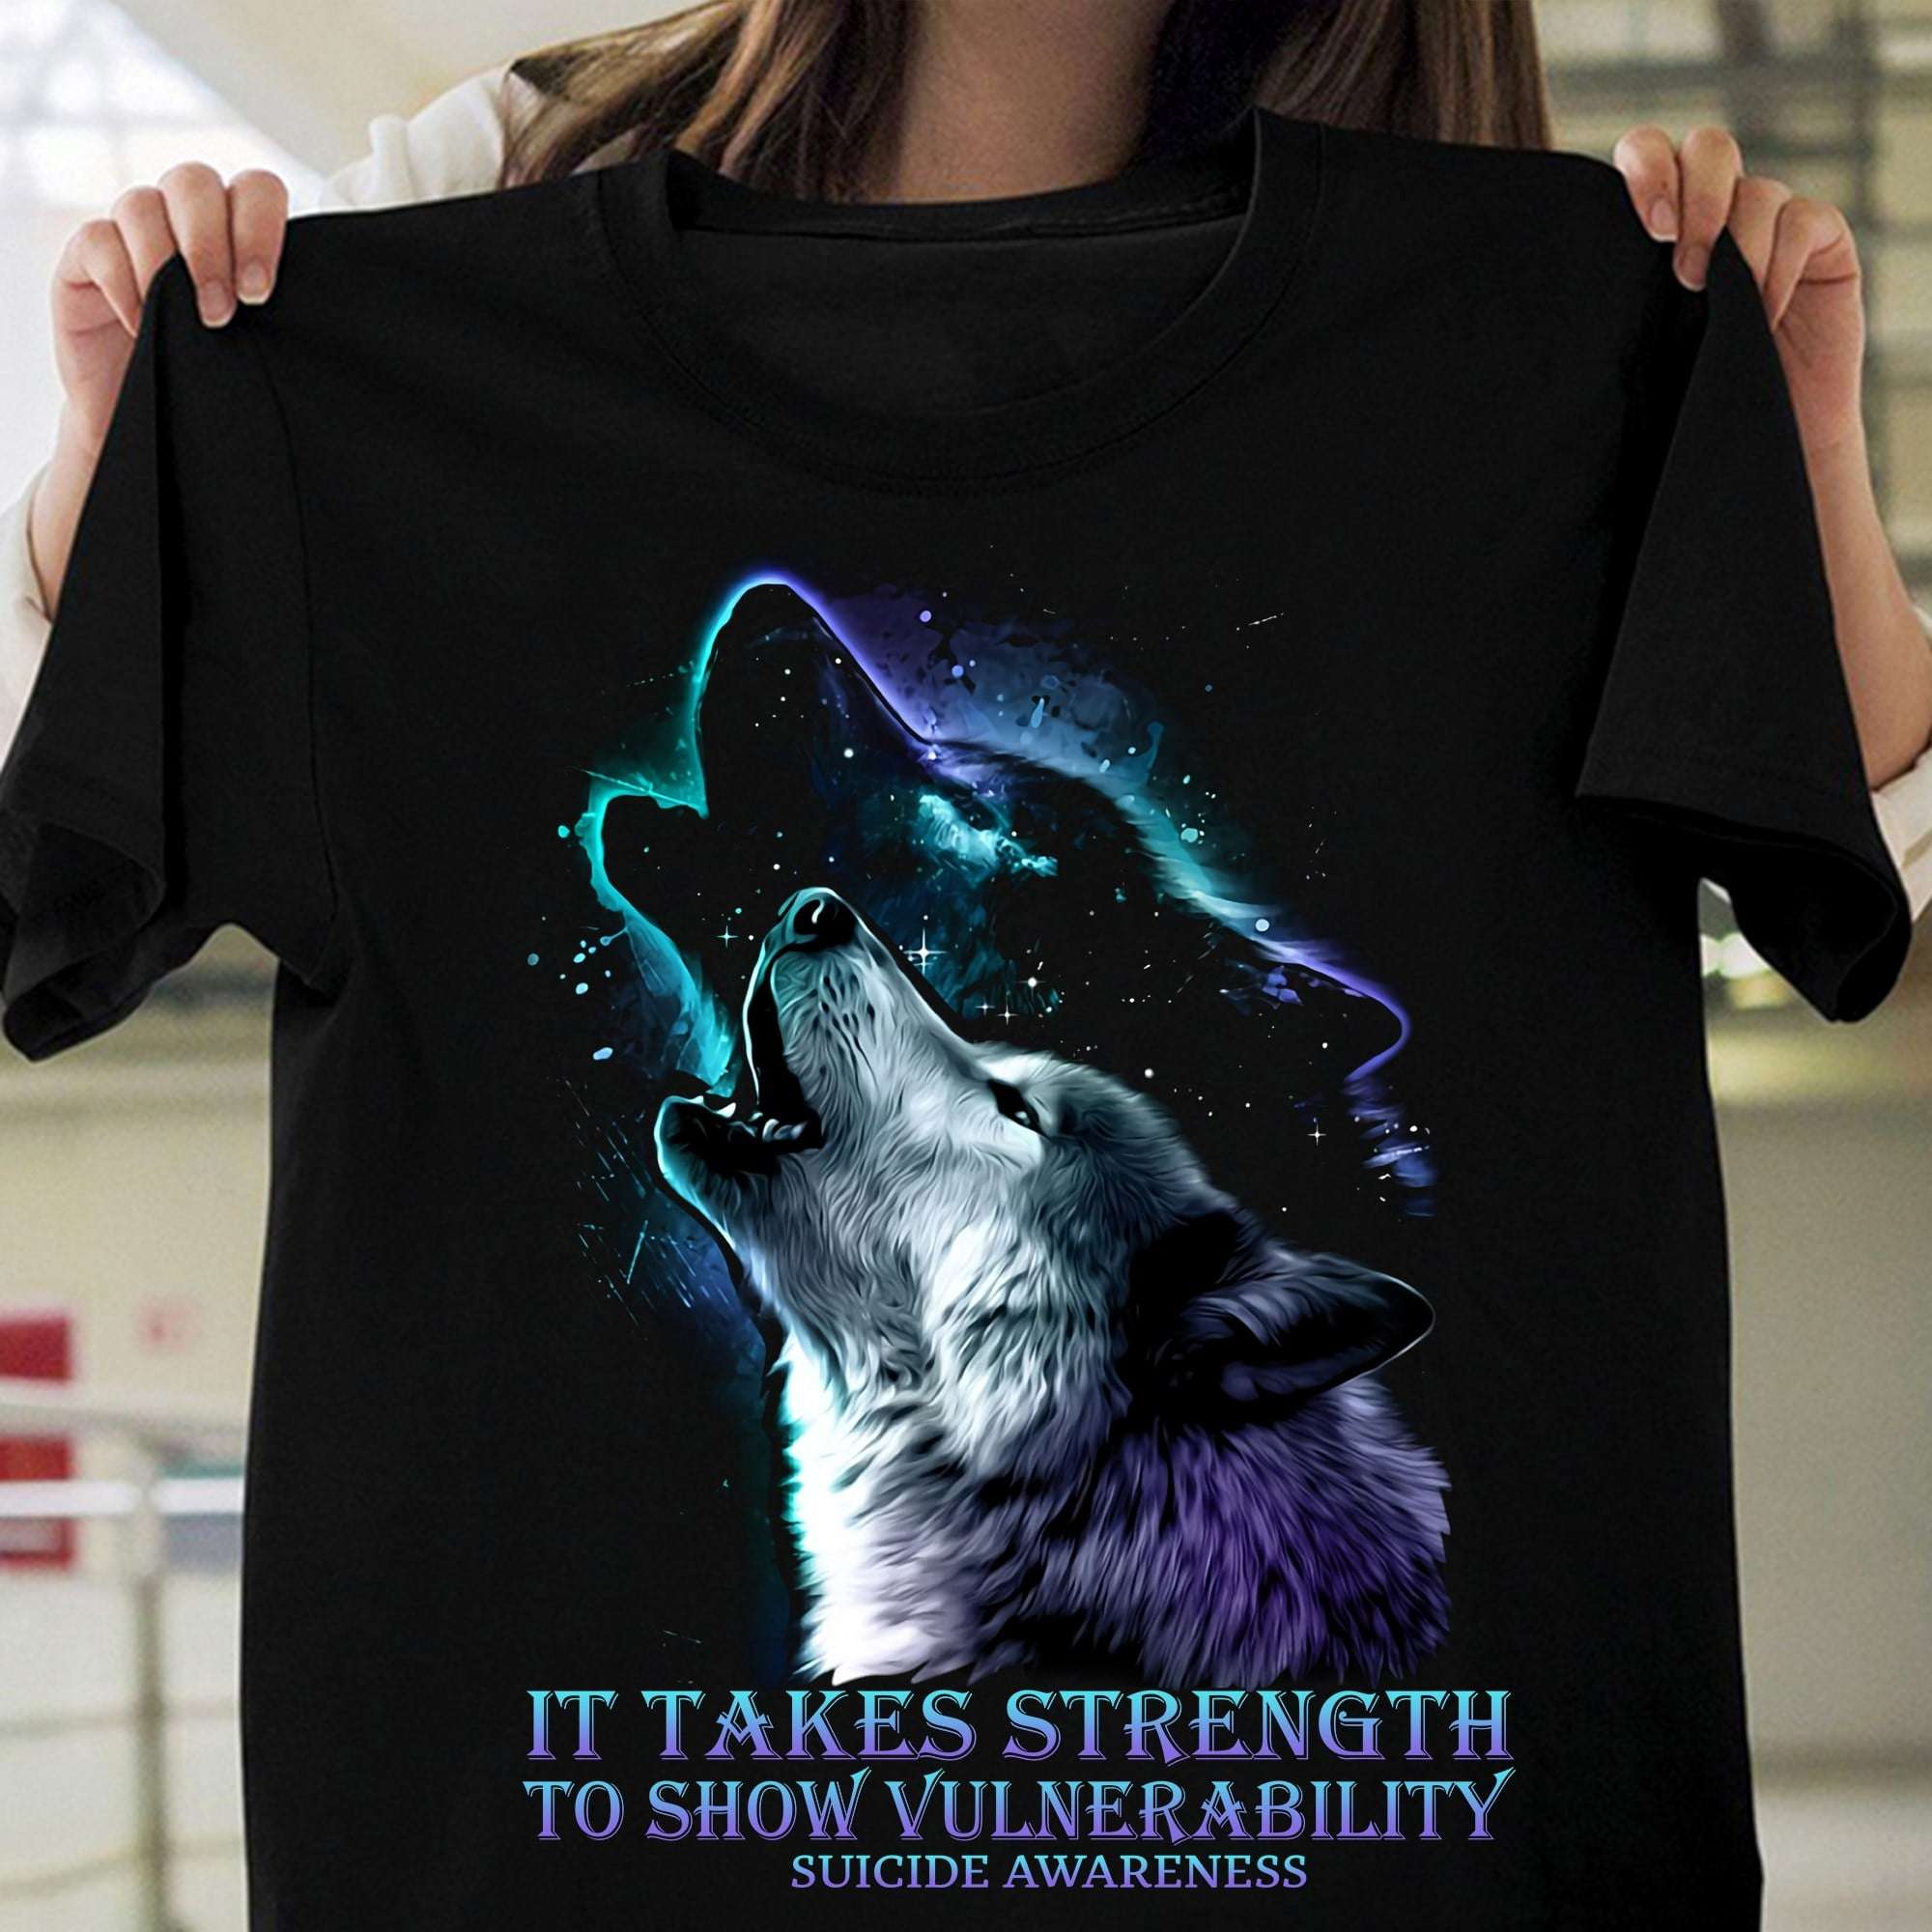 It takes strength to show vunerability - Suicide awareness, wolf suicide ribbon